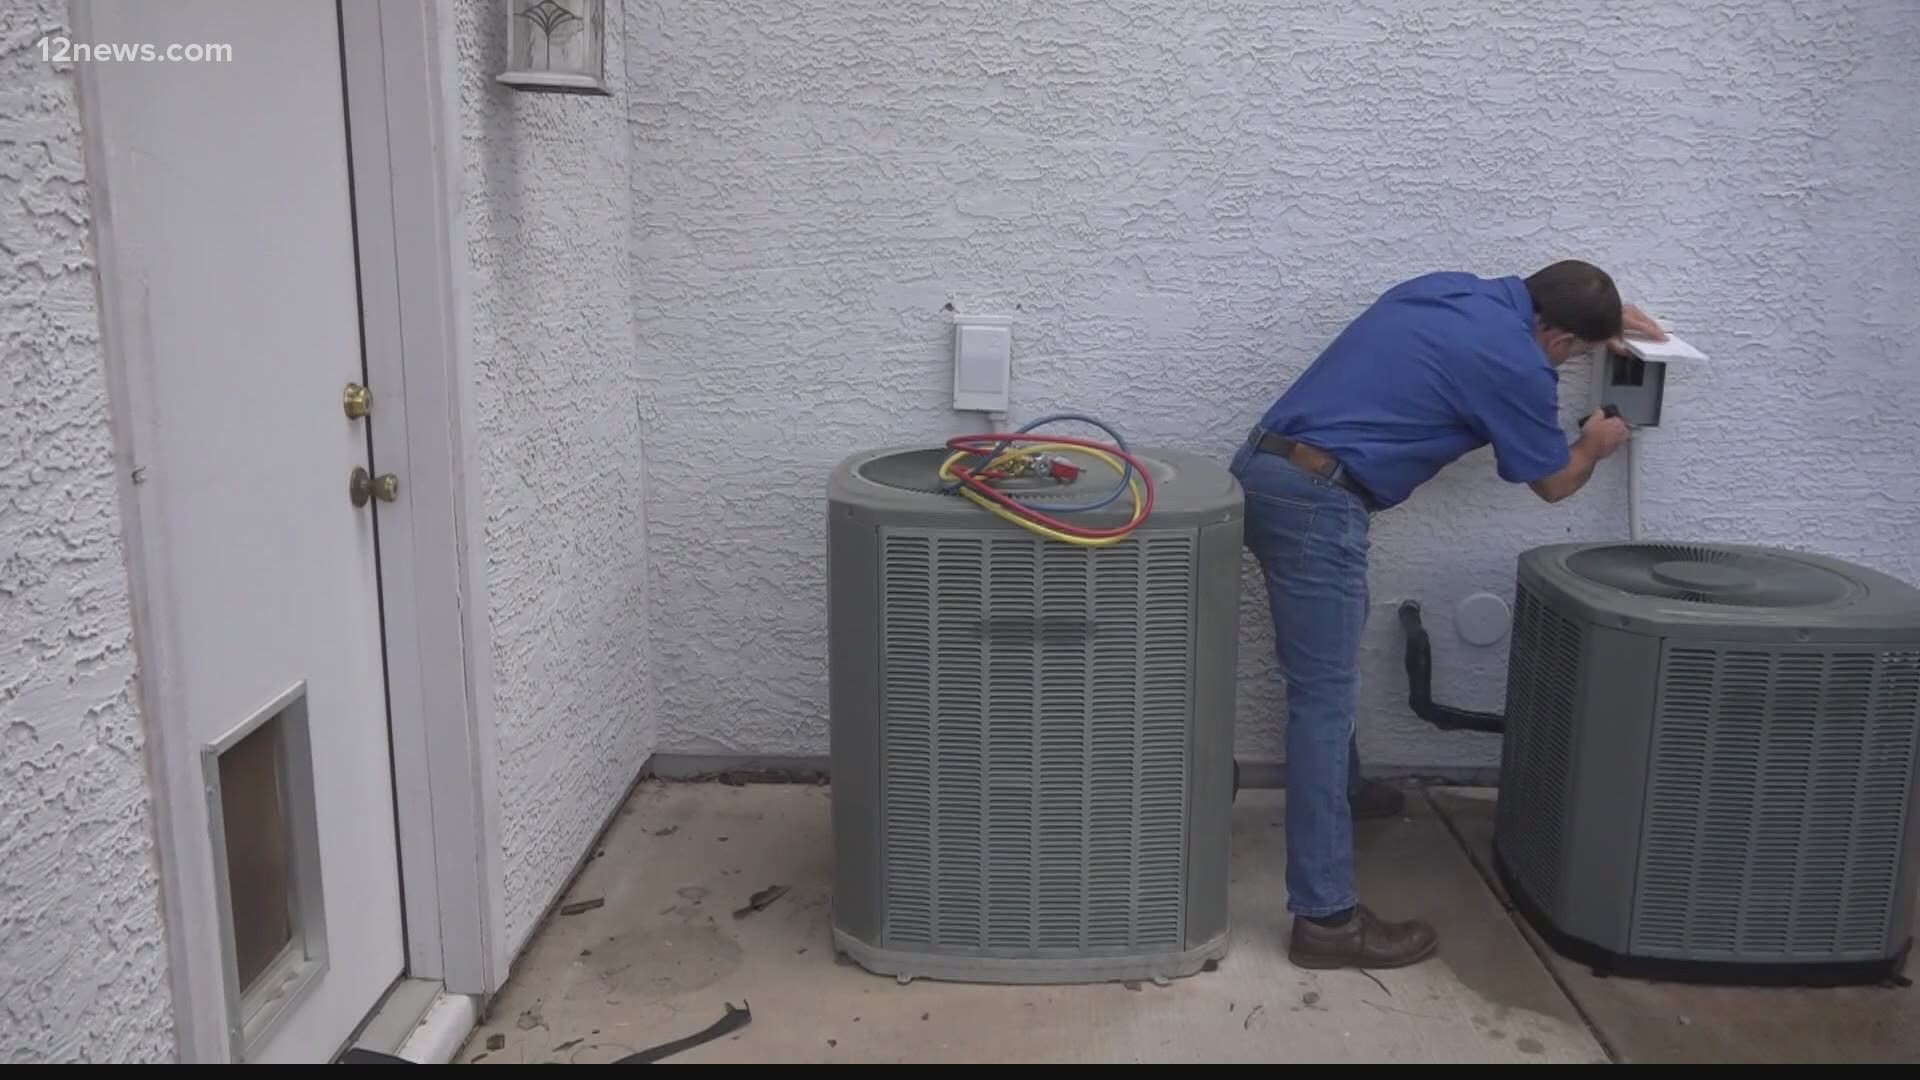 Your air conditioning is vital during the summer months. An expert offers some troubleshooting tips in case you encounter problems with your a/c.